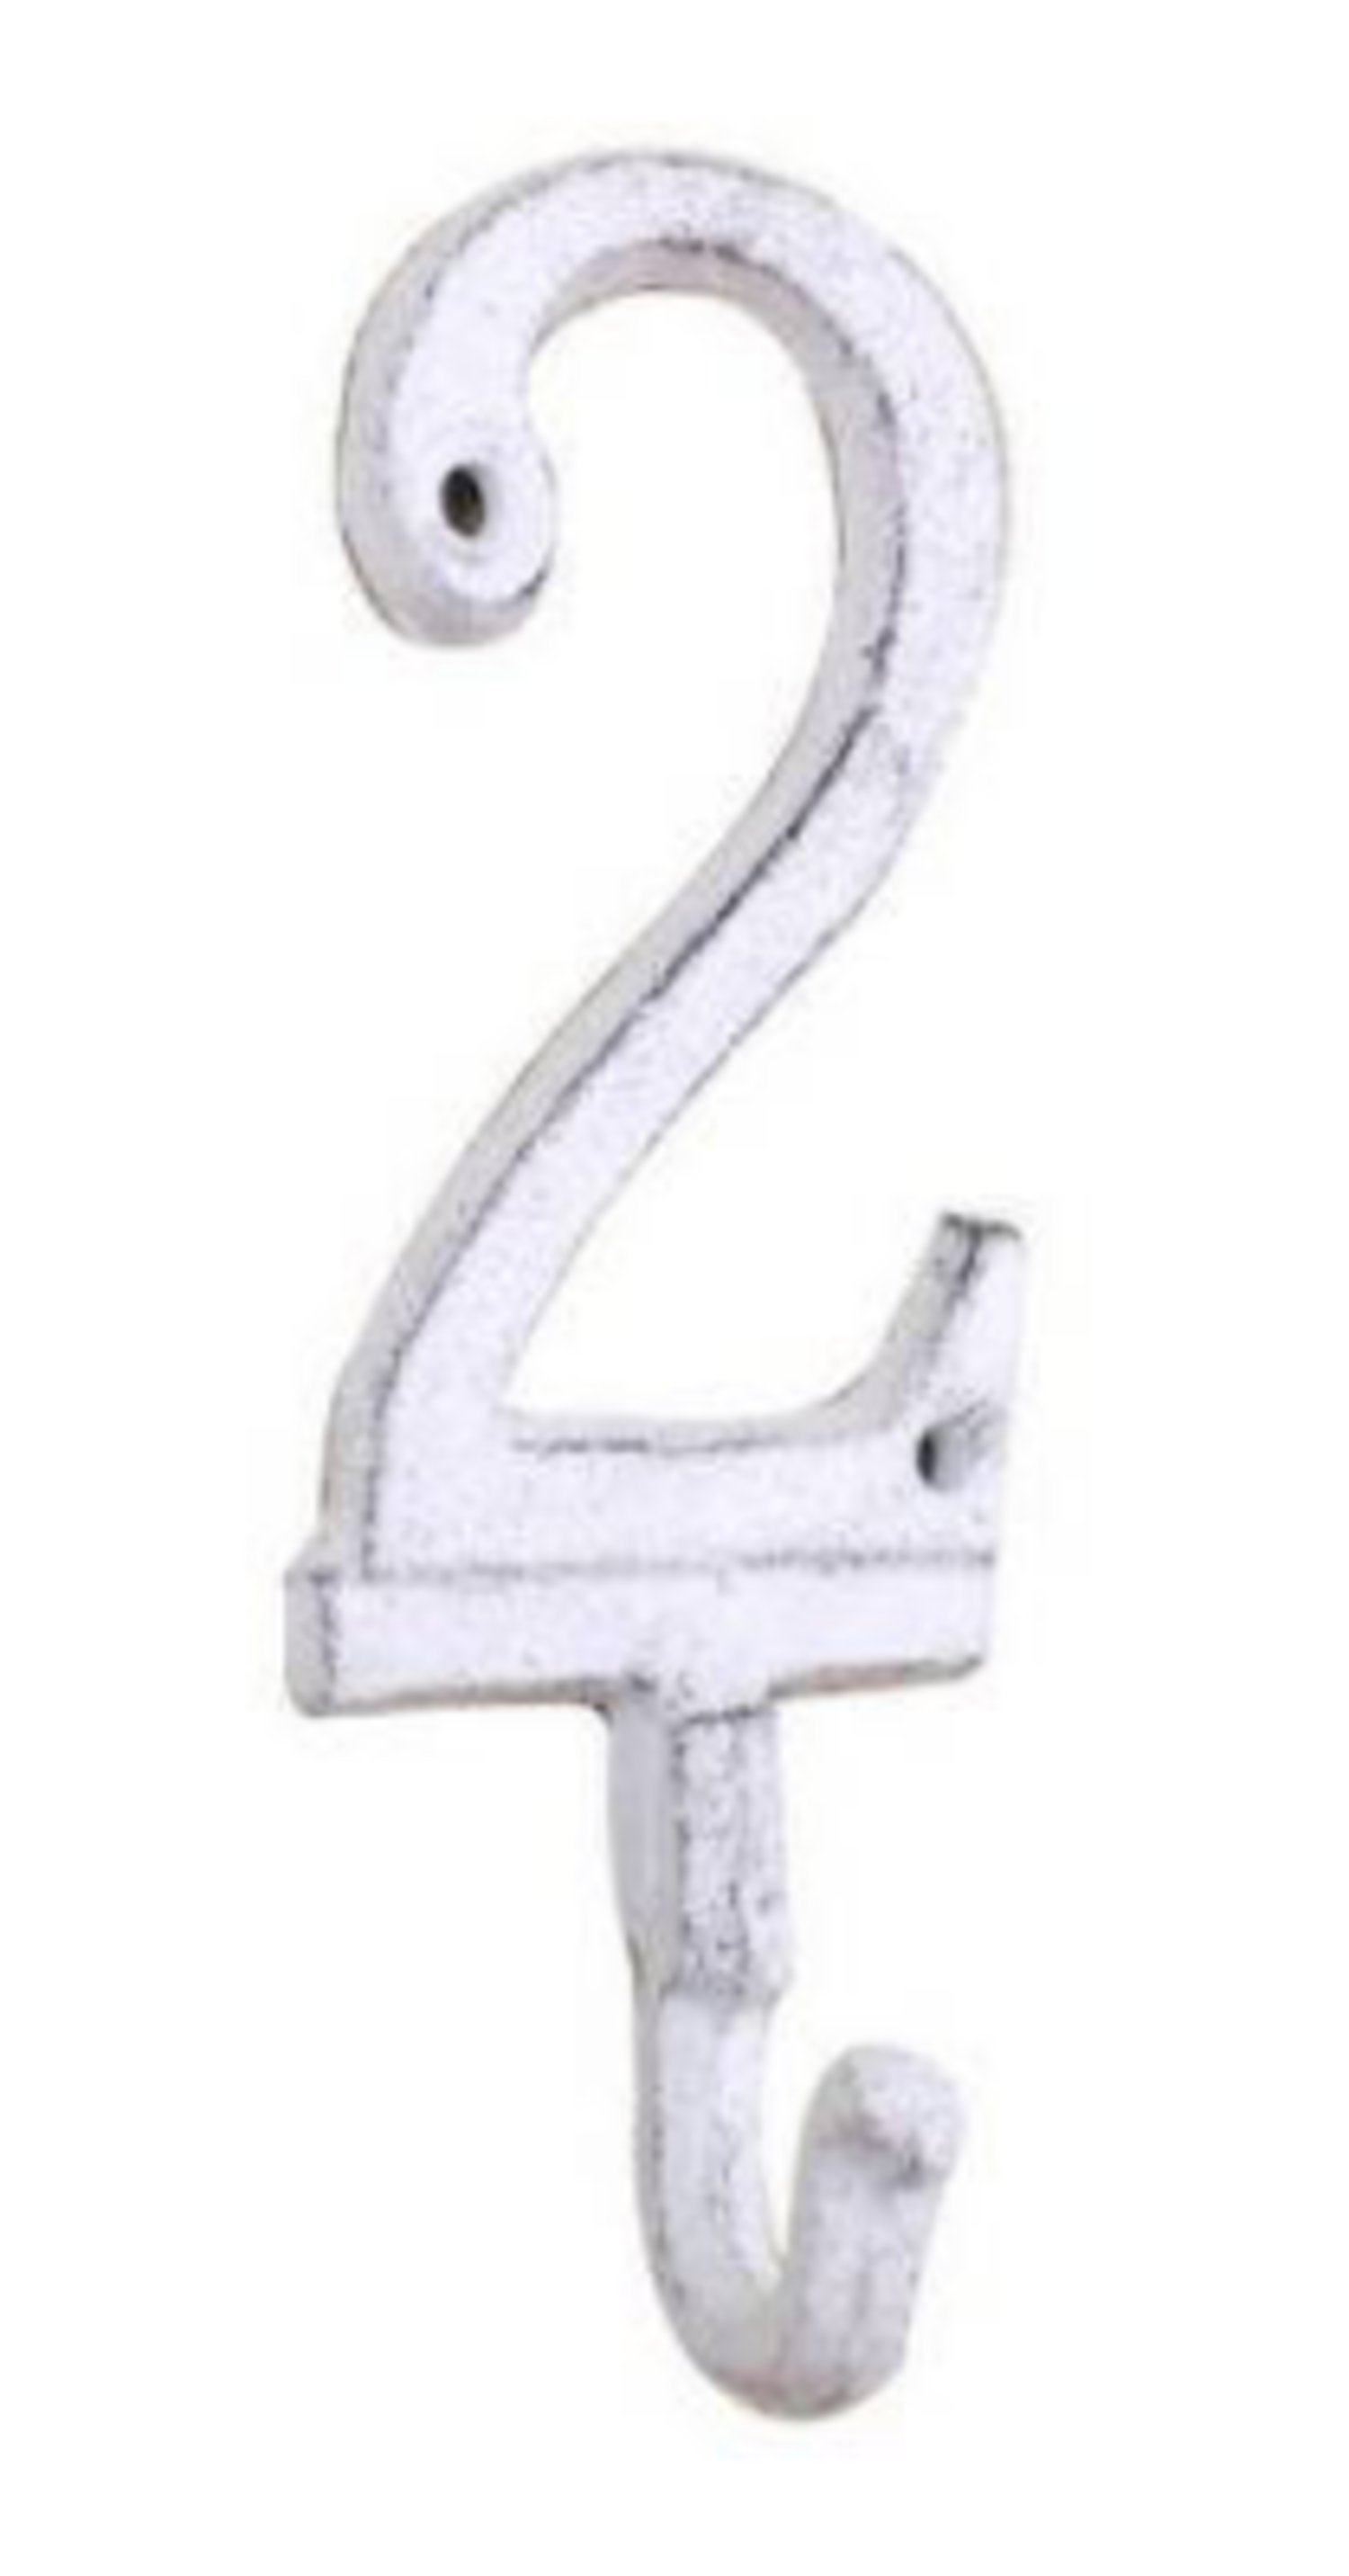 Whitewashed Cast Iron Number 2 Wall Hook - Sarasota Architectural  Salvage, 1093 Central Ave. Sarasota, FL 34236